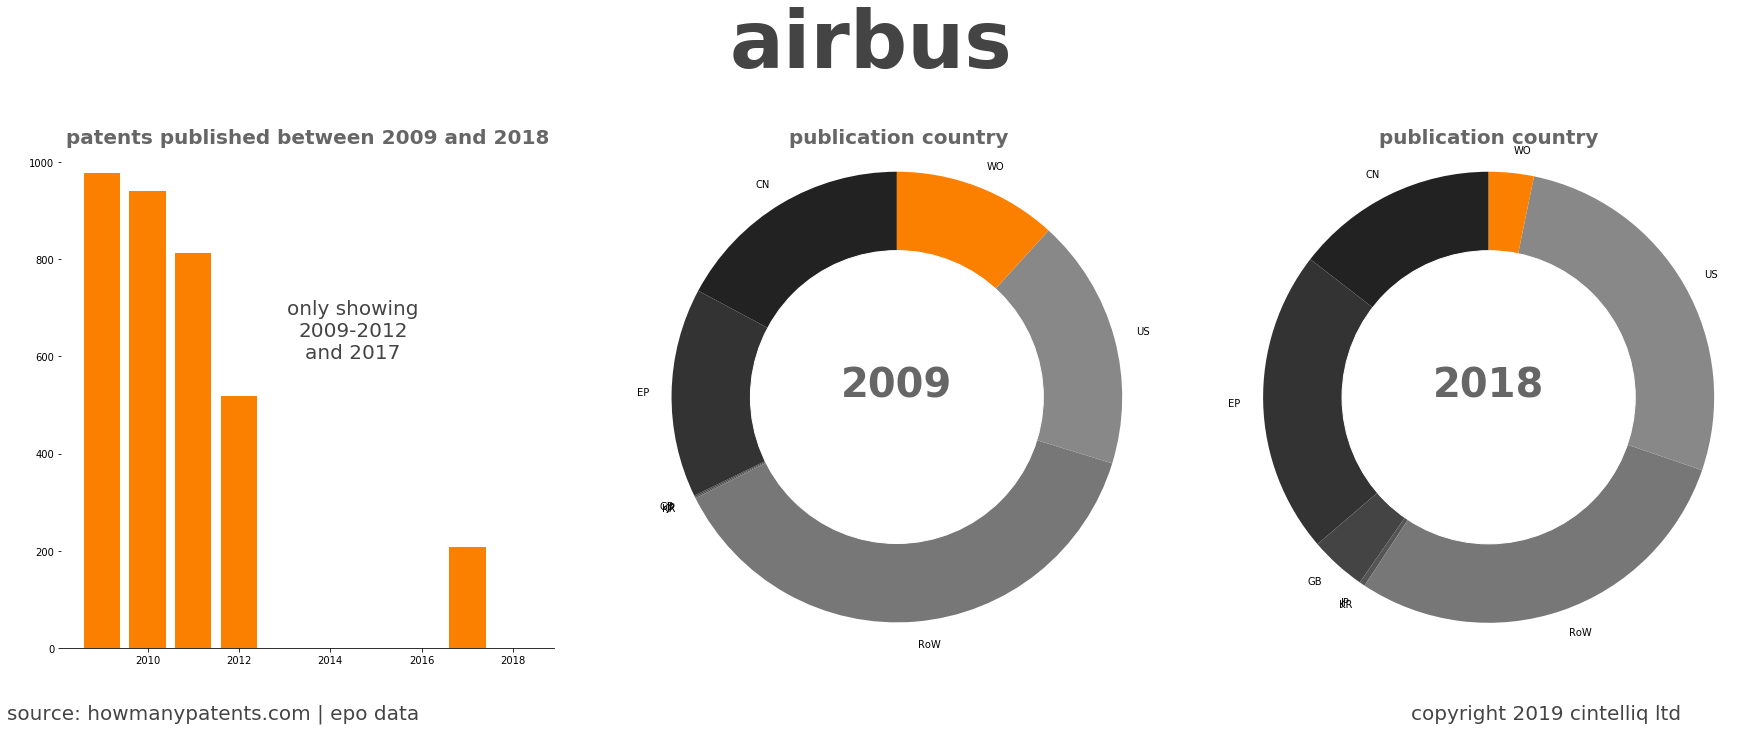 summary of patents for Airbus